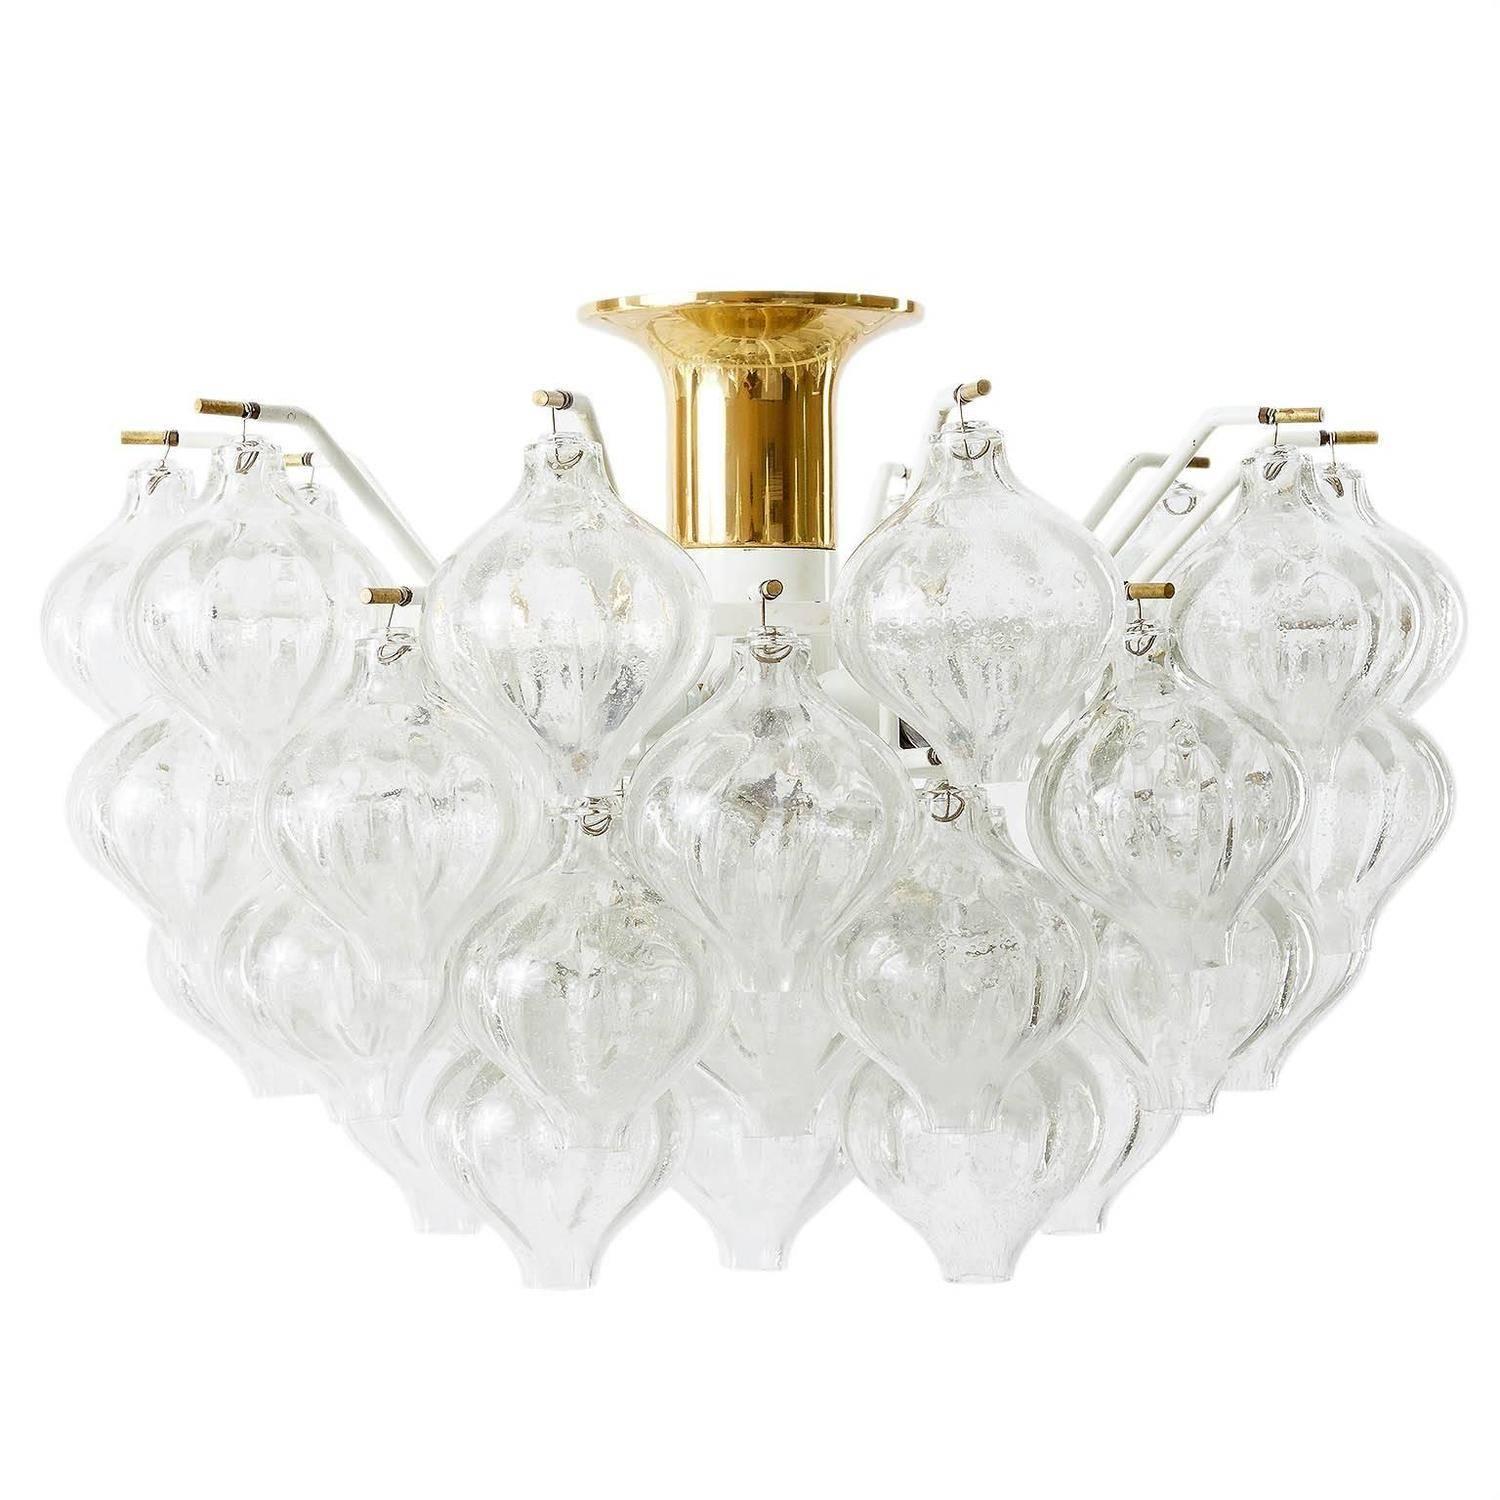 A gorgeous light fixture model Tulipan by J.T. Kalmar, Vienna, Austria, manufactured in midcentury, circa 1970 (late 1960s or early 1970s).
The name Tulipan derives from the tulip shaped handblown bubble glasses. Each glass is handmade and